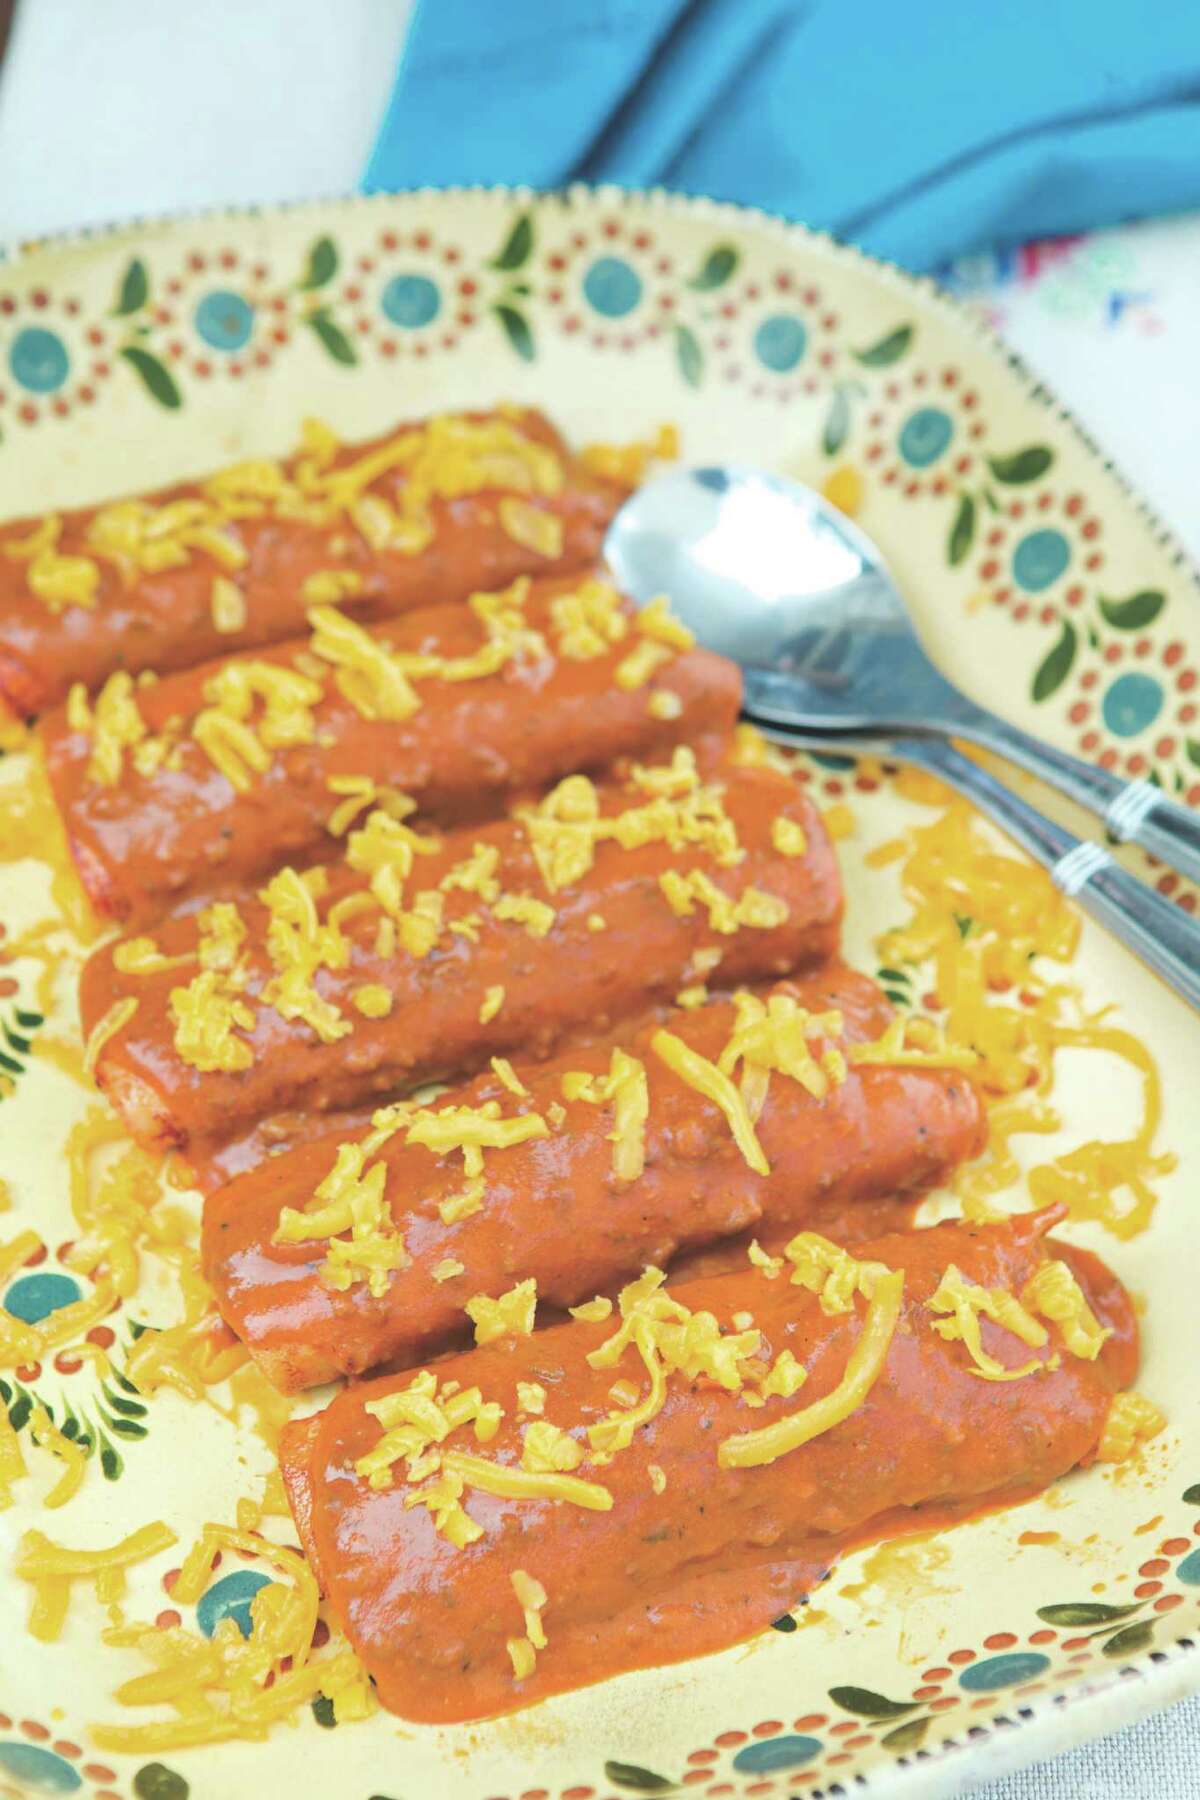 Cheese Enchiladas with Chili Gravy are featured in "The Enchilada Queen Cookbook" by Sylvia Casares. Recipe, page D2